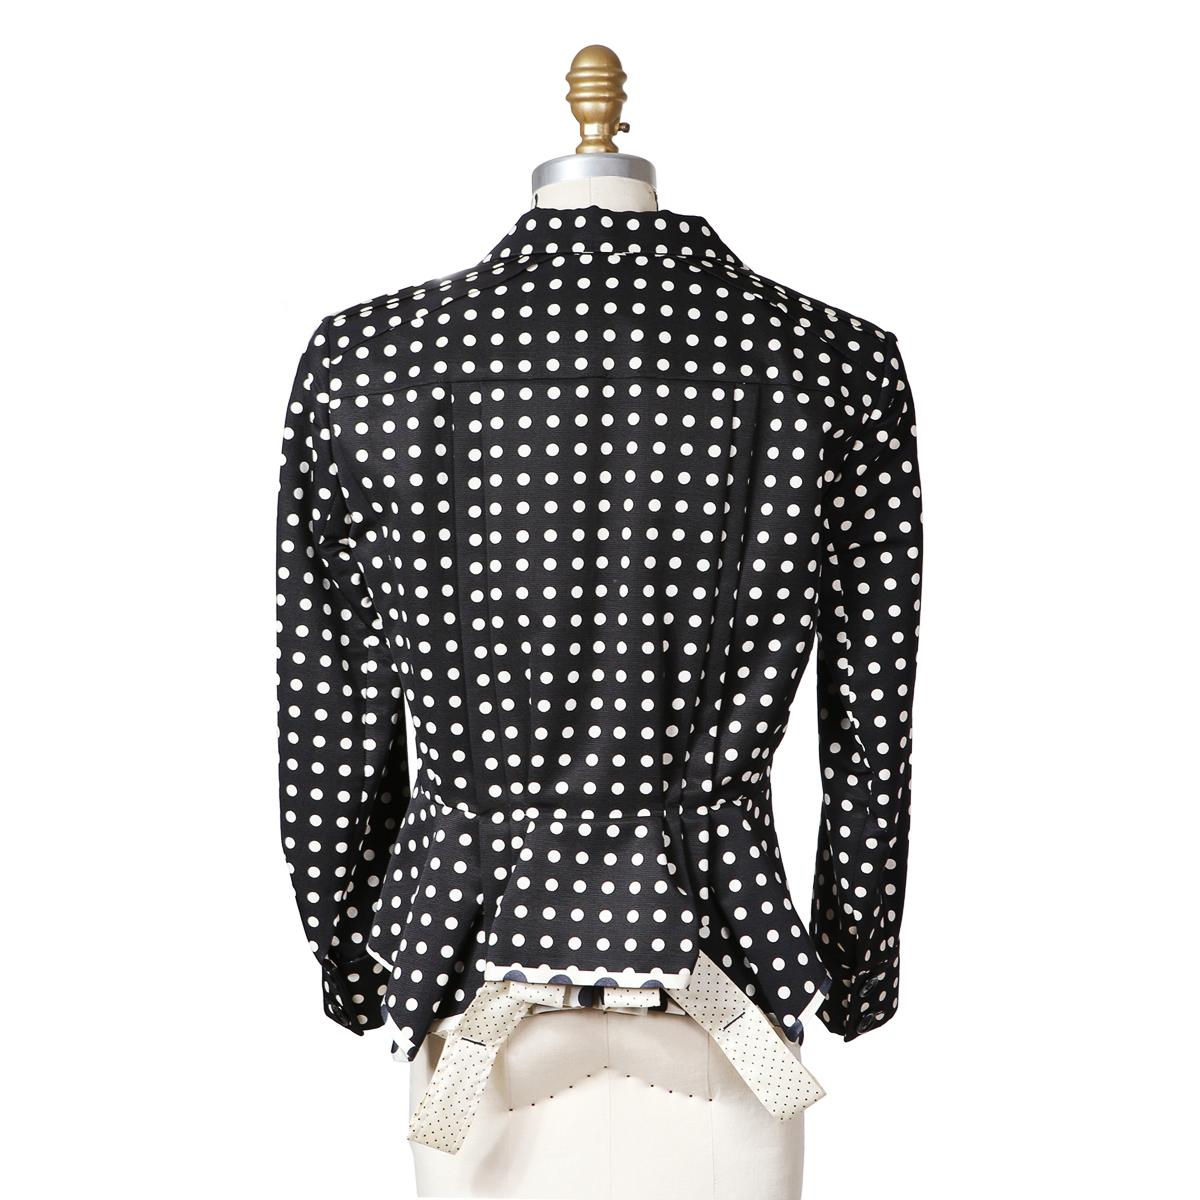 Jacket by Stefano Pilati for Yves Saint Laurent circa 2000s
Hidden button closure in front
Two different sized polka dot patterns 
Hanging straps along bottom
Cinched waist peplum
Condition: Excellent
Size/Measurements:
Size 36
36